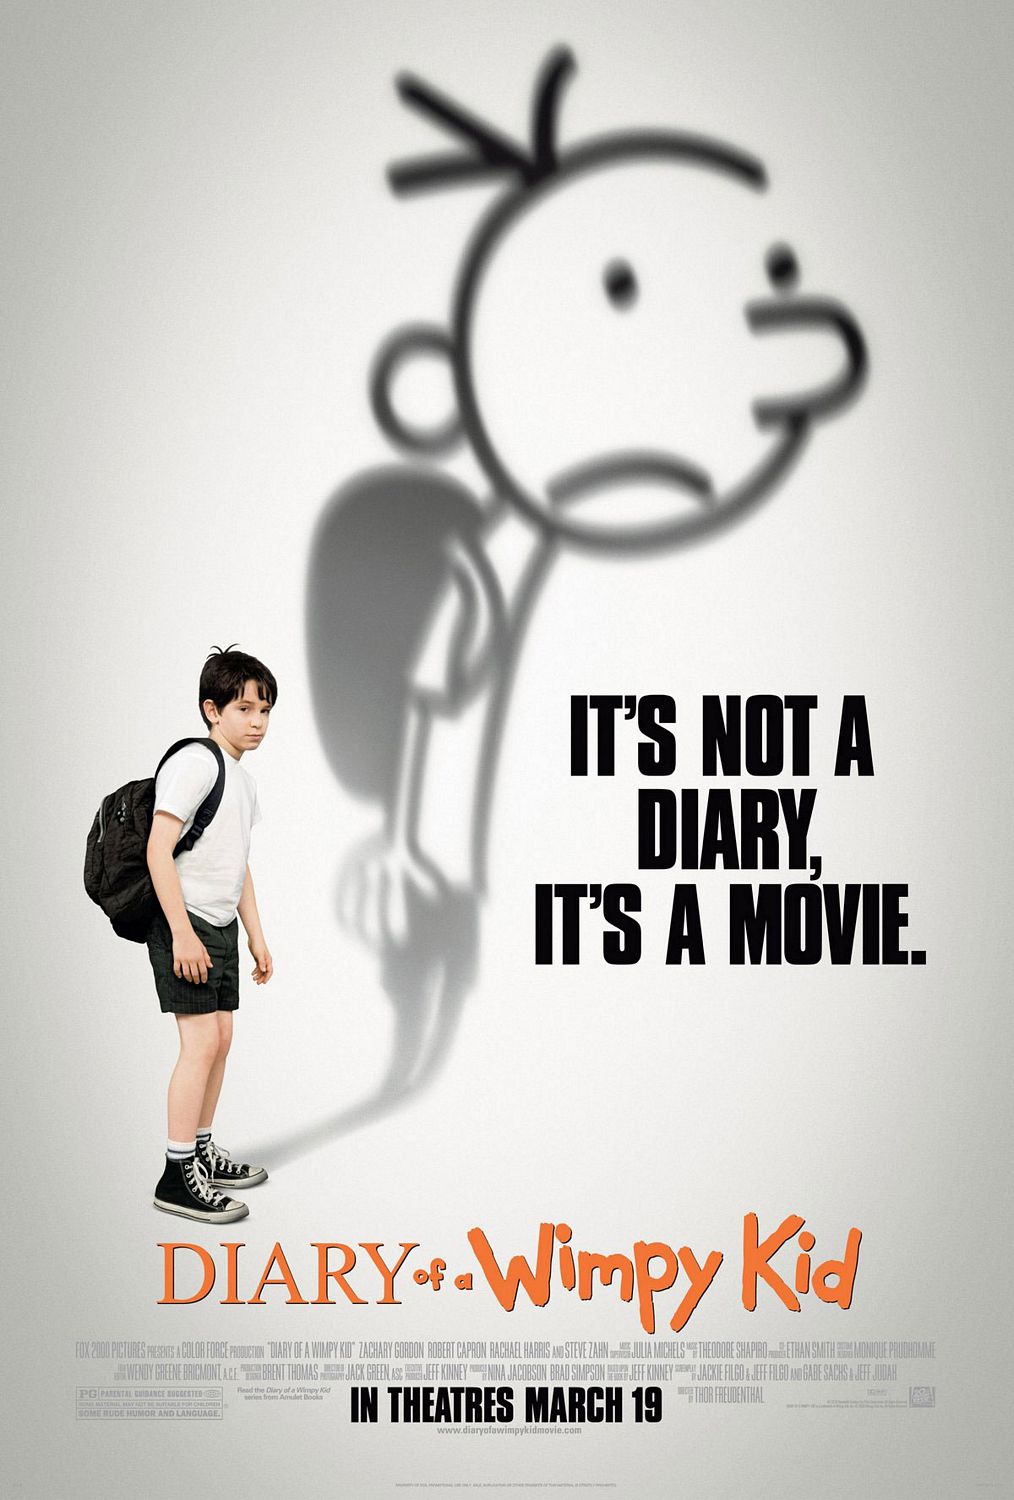 Extra Large Movie Poster Image for Diary of a Wimpy Kid (#6 of 9)